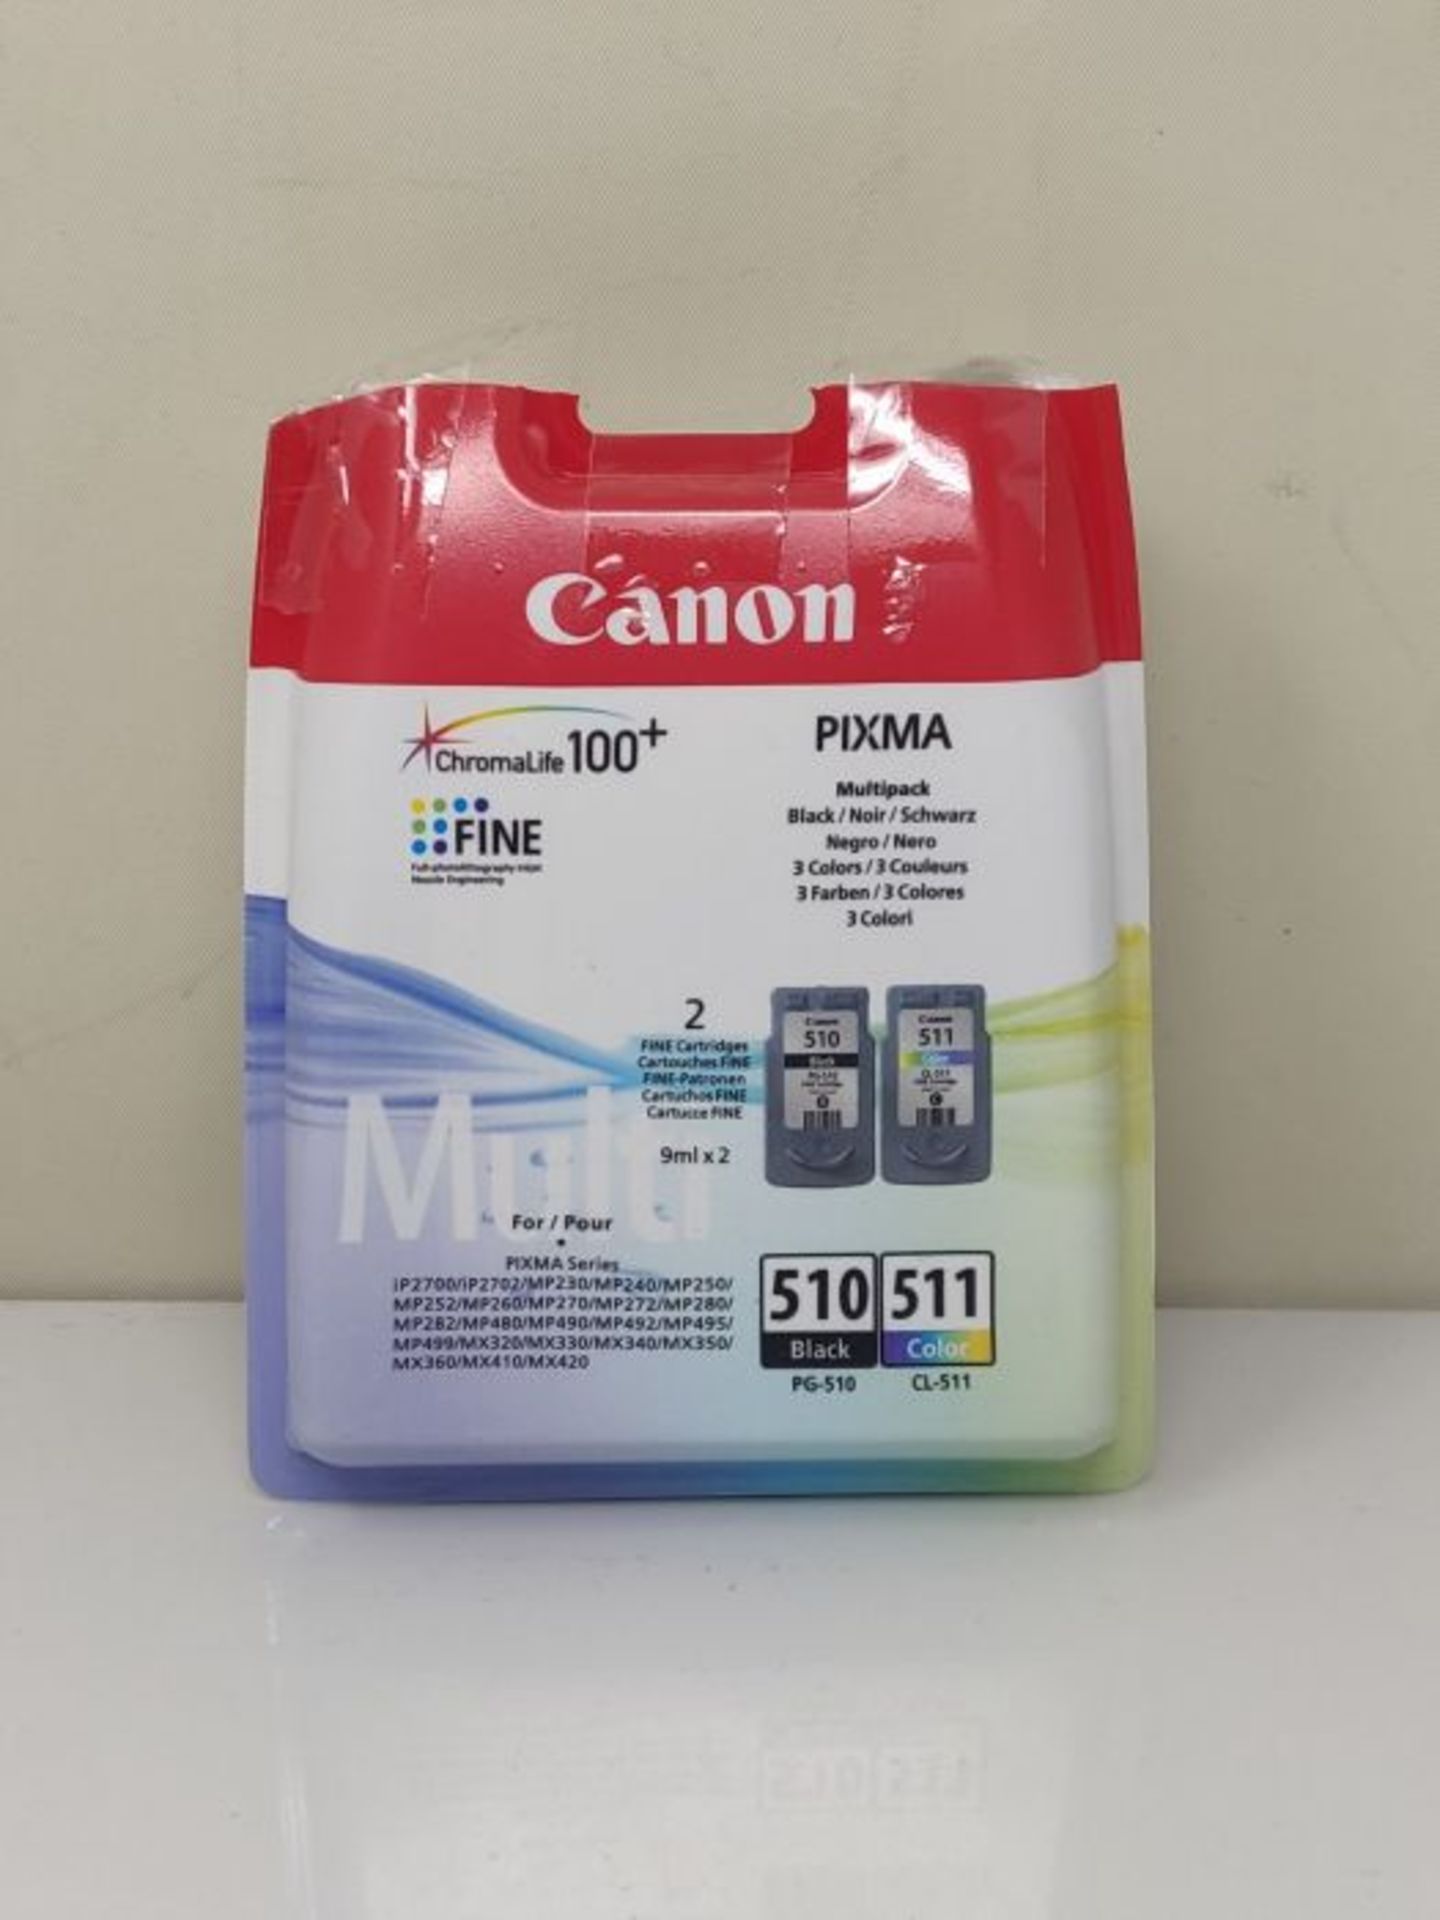 Canon PG-510 / CL-511 Black and color ink cartridge standard capacity black: 240 color - Image 2 of 3